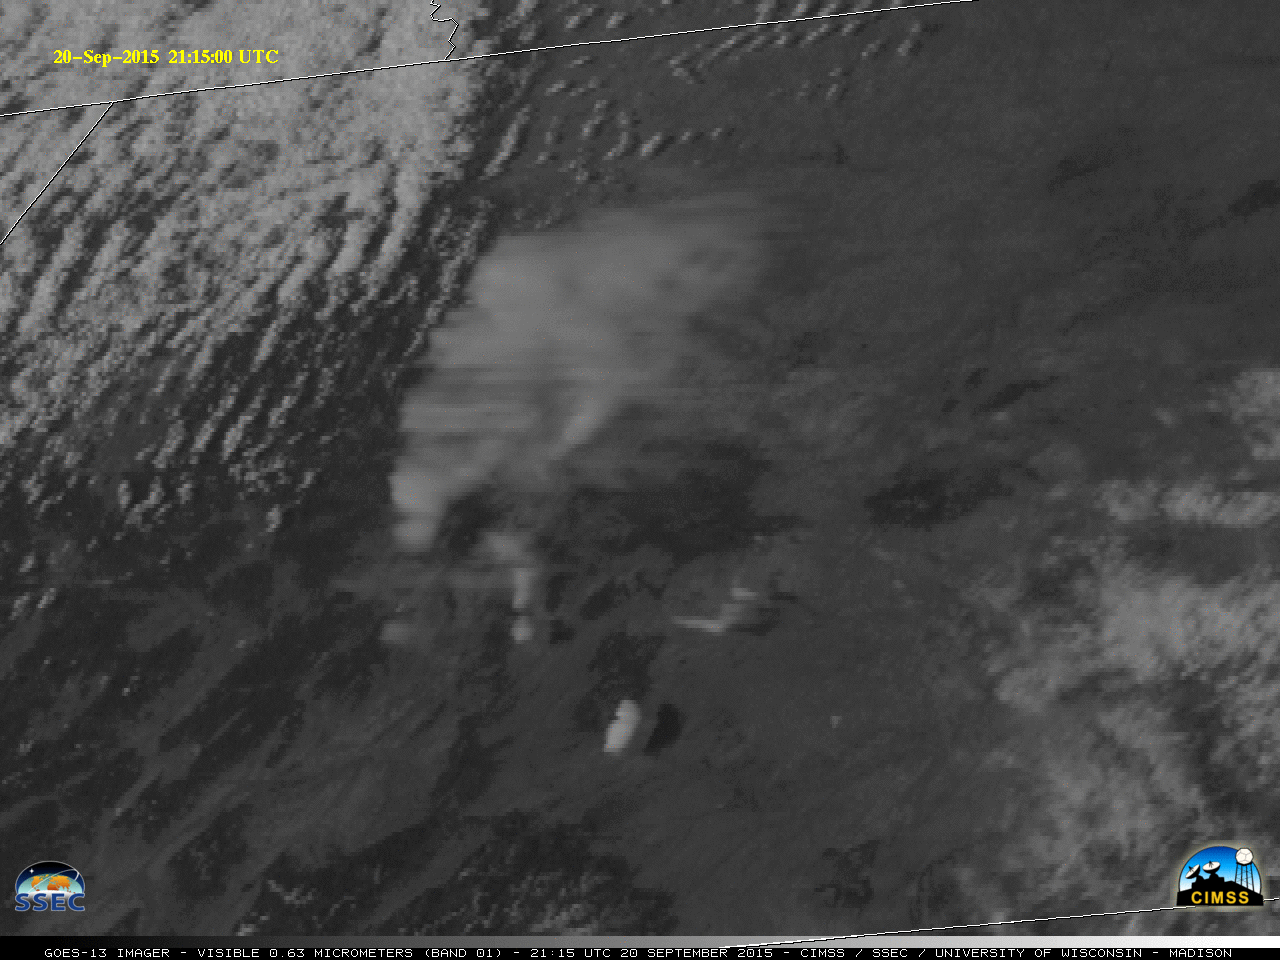 GOES-13 visible (0.63 µm) images [click to play animation]